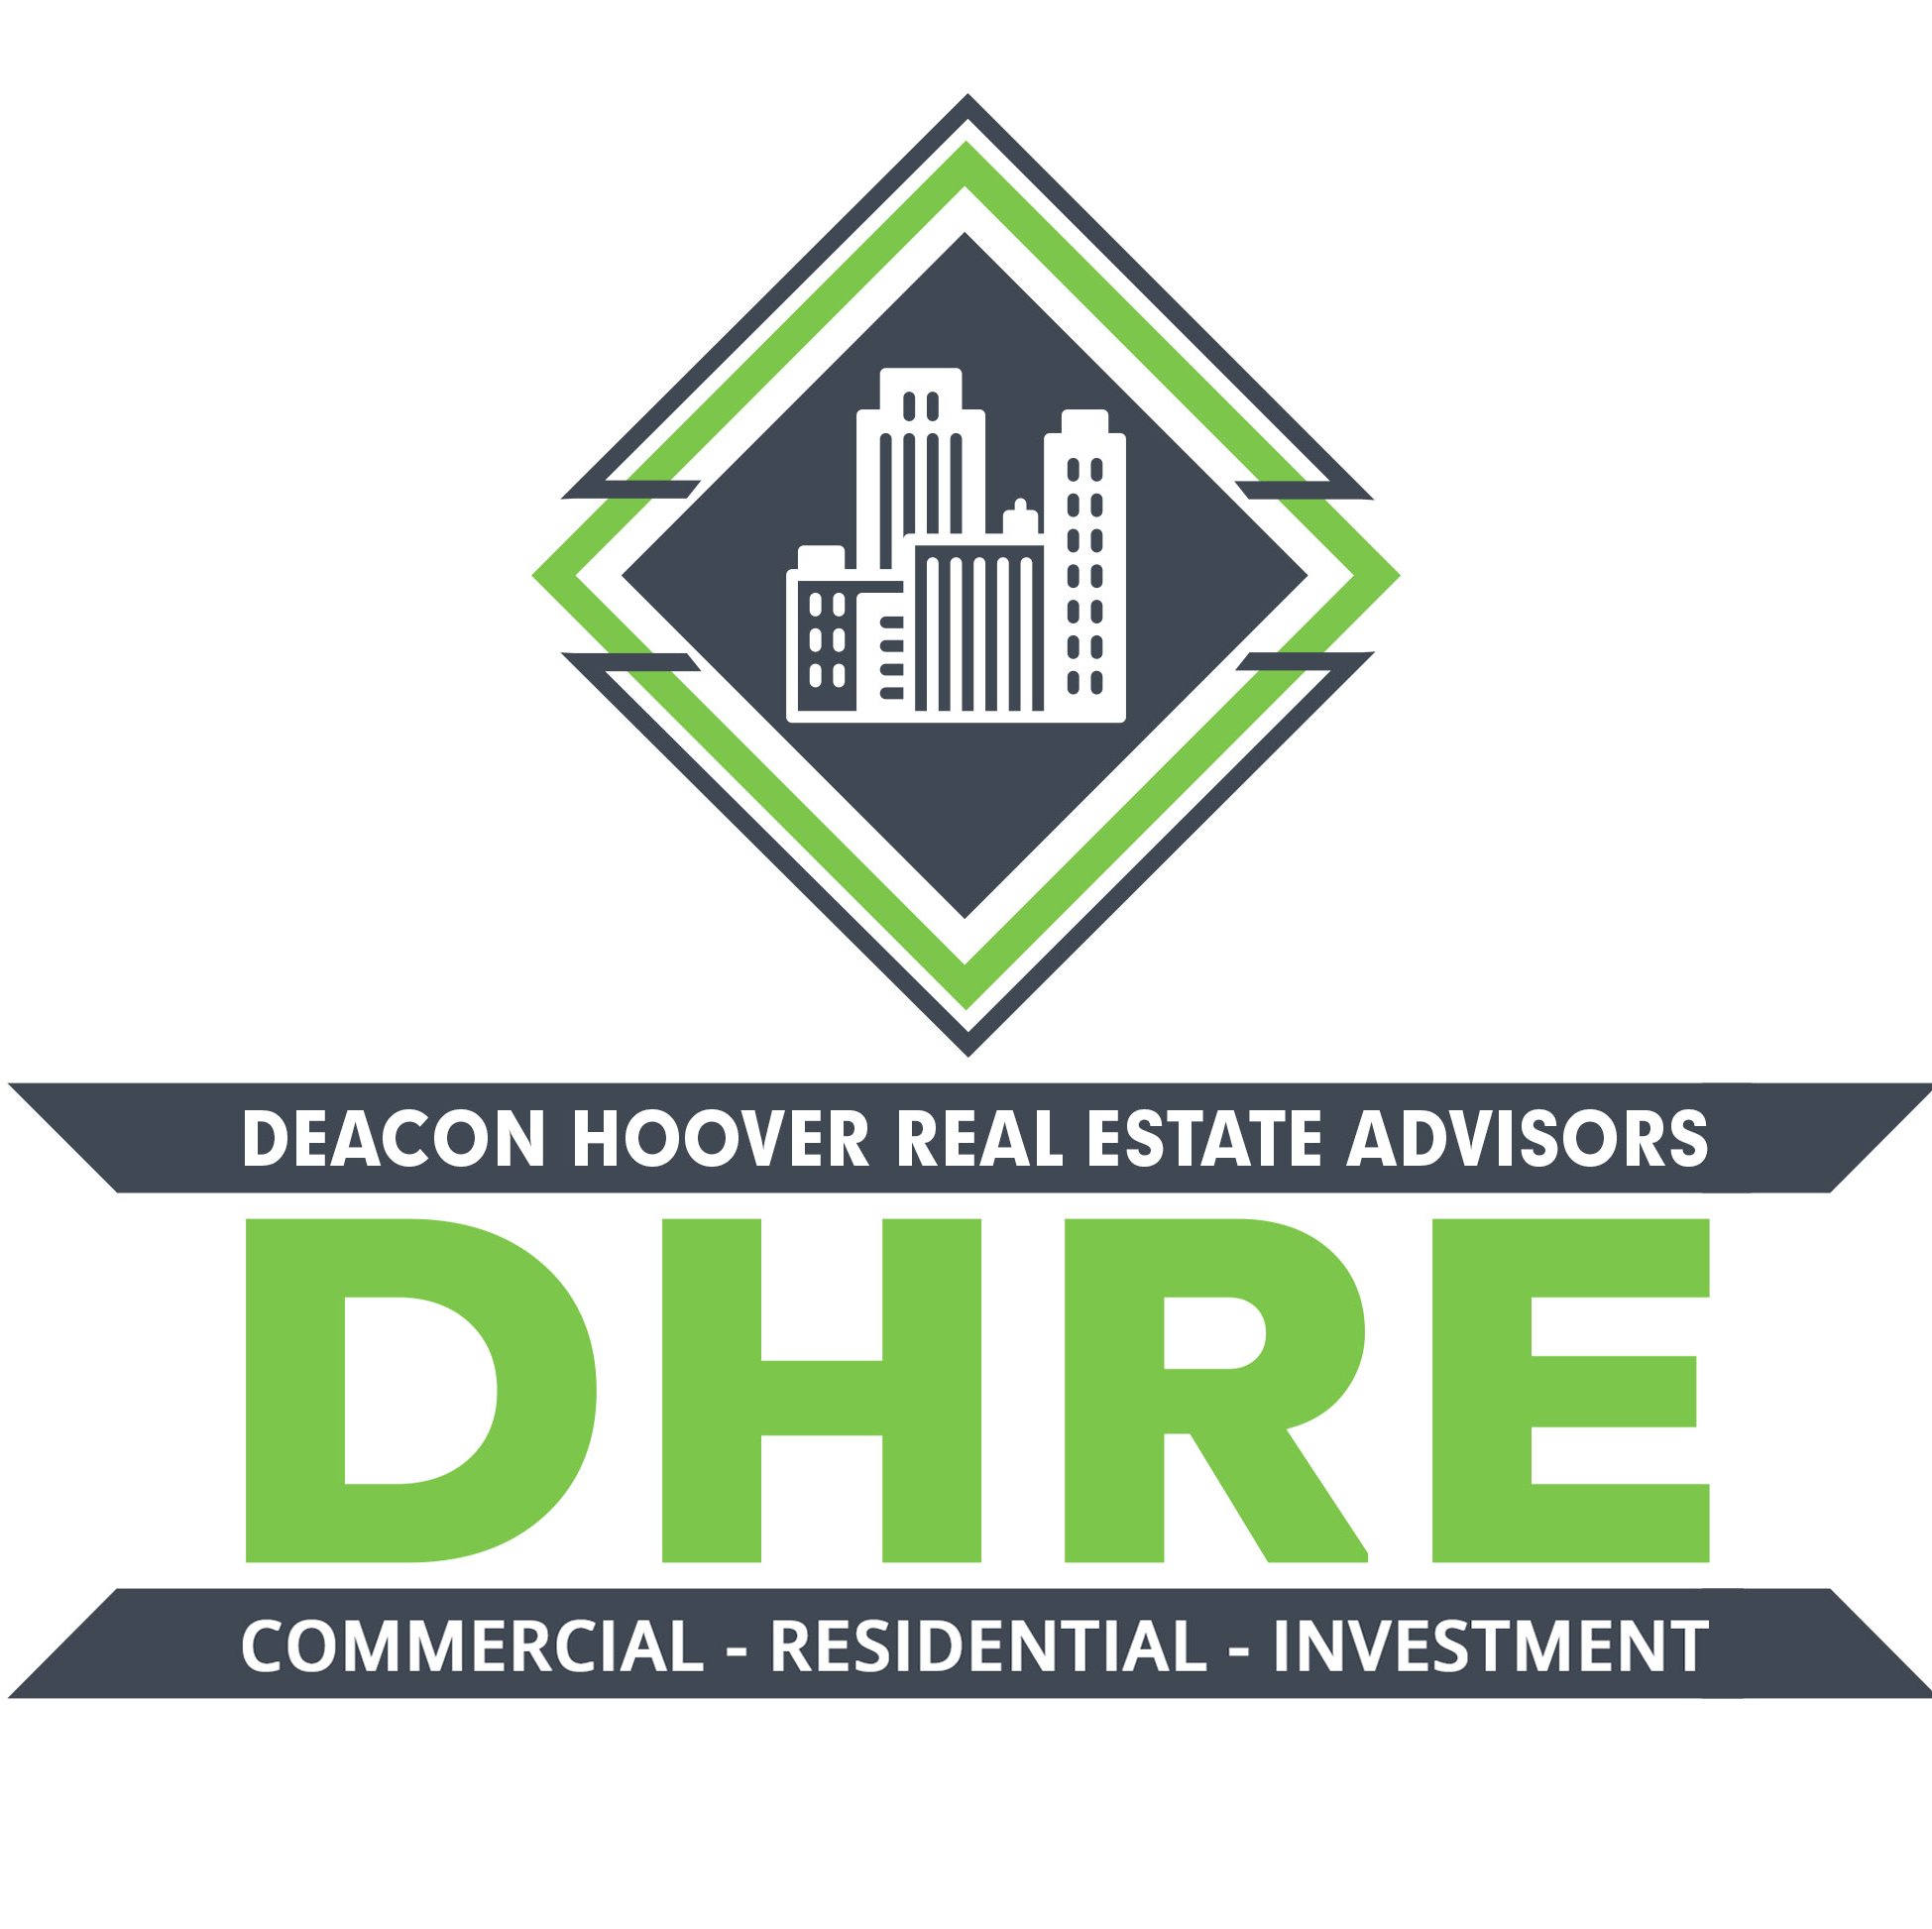 Proudly serving the #Pittsburgh area, Deacon Hoover Real Estate Advisors specializes in #Commercial, #Residential, and #Investment properties. #Realtor #PGH